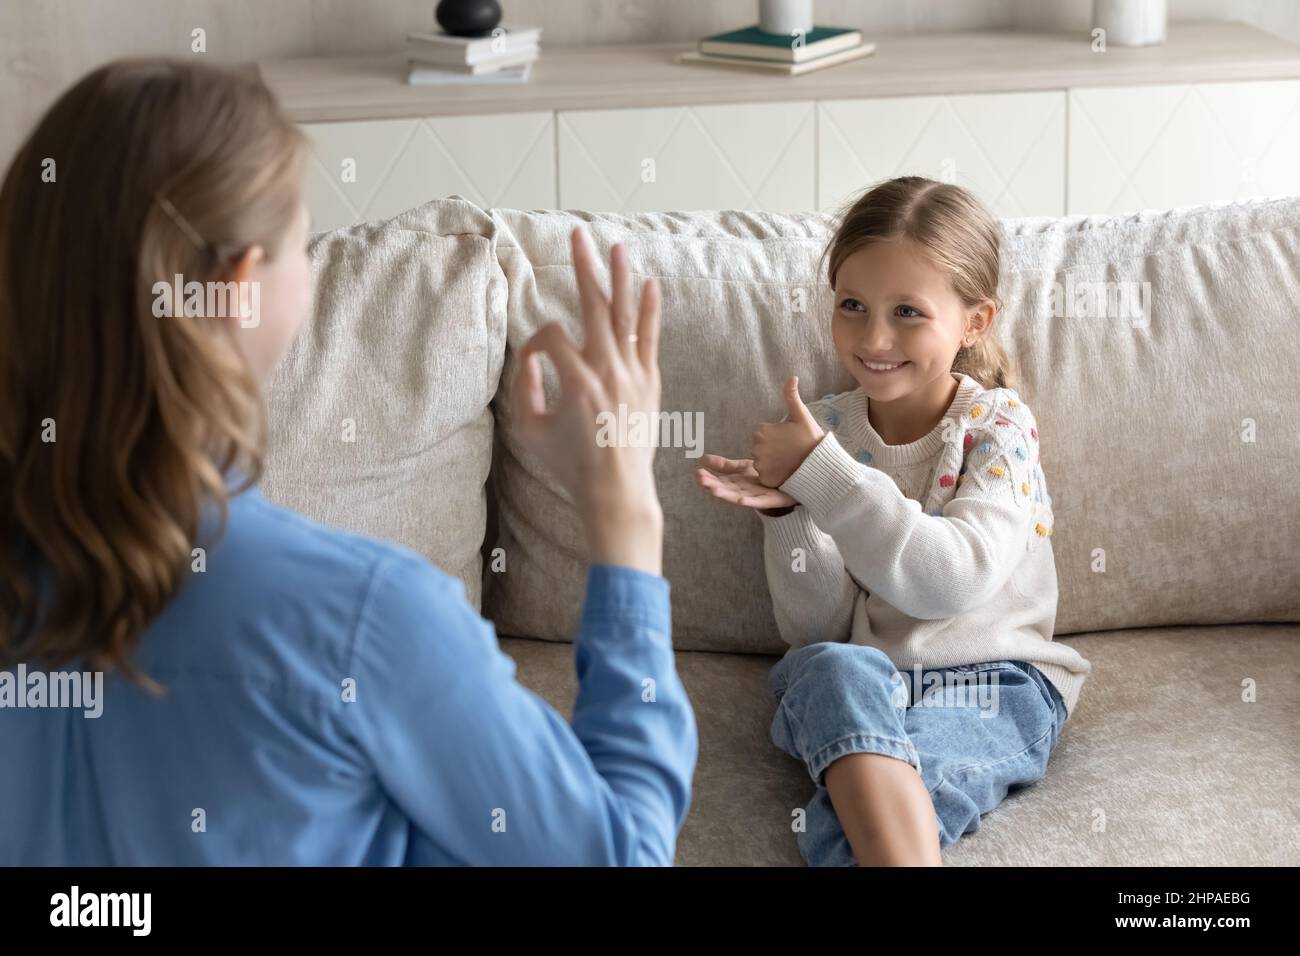 Happy little kid and mom speaking sign language Stock Photo